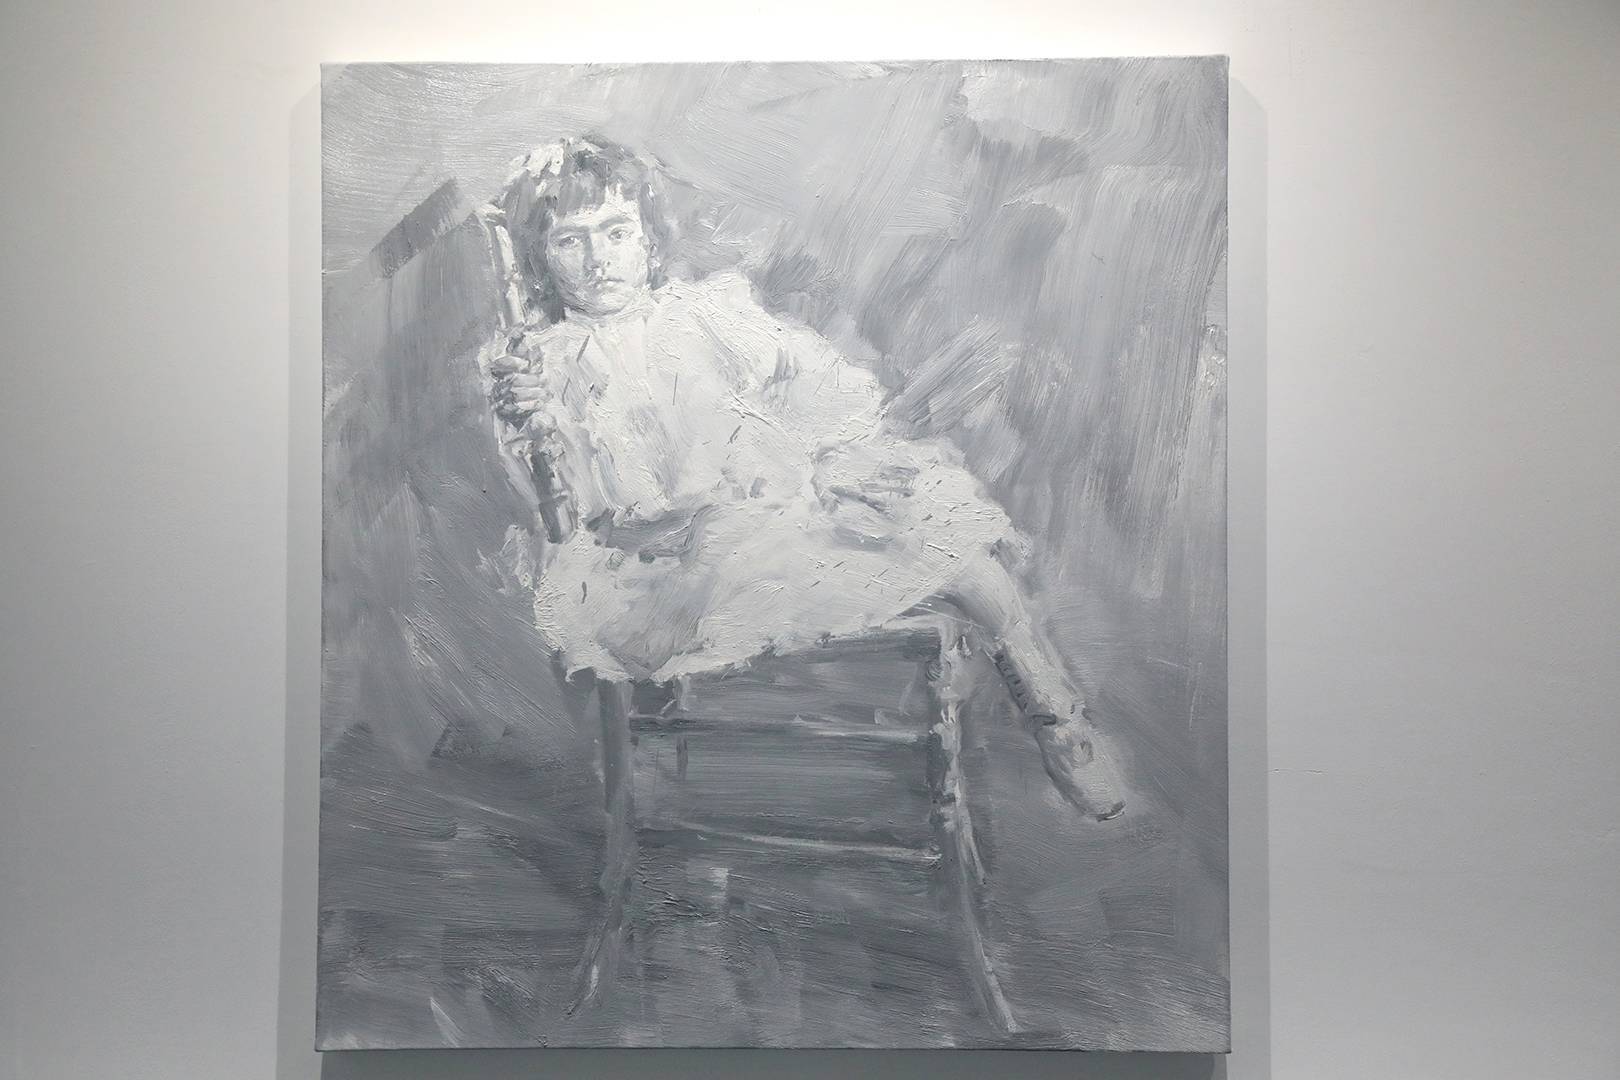 YAN PEI-MING〈GREY YOUNG FRIDA KAHLO SITTING ON A CHAIR〉